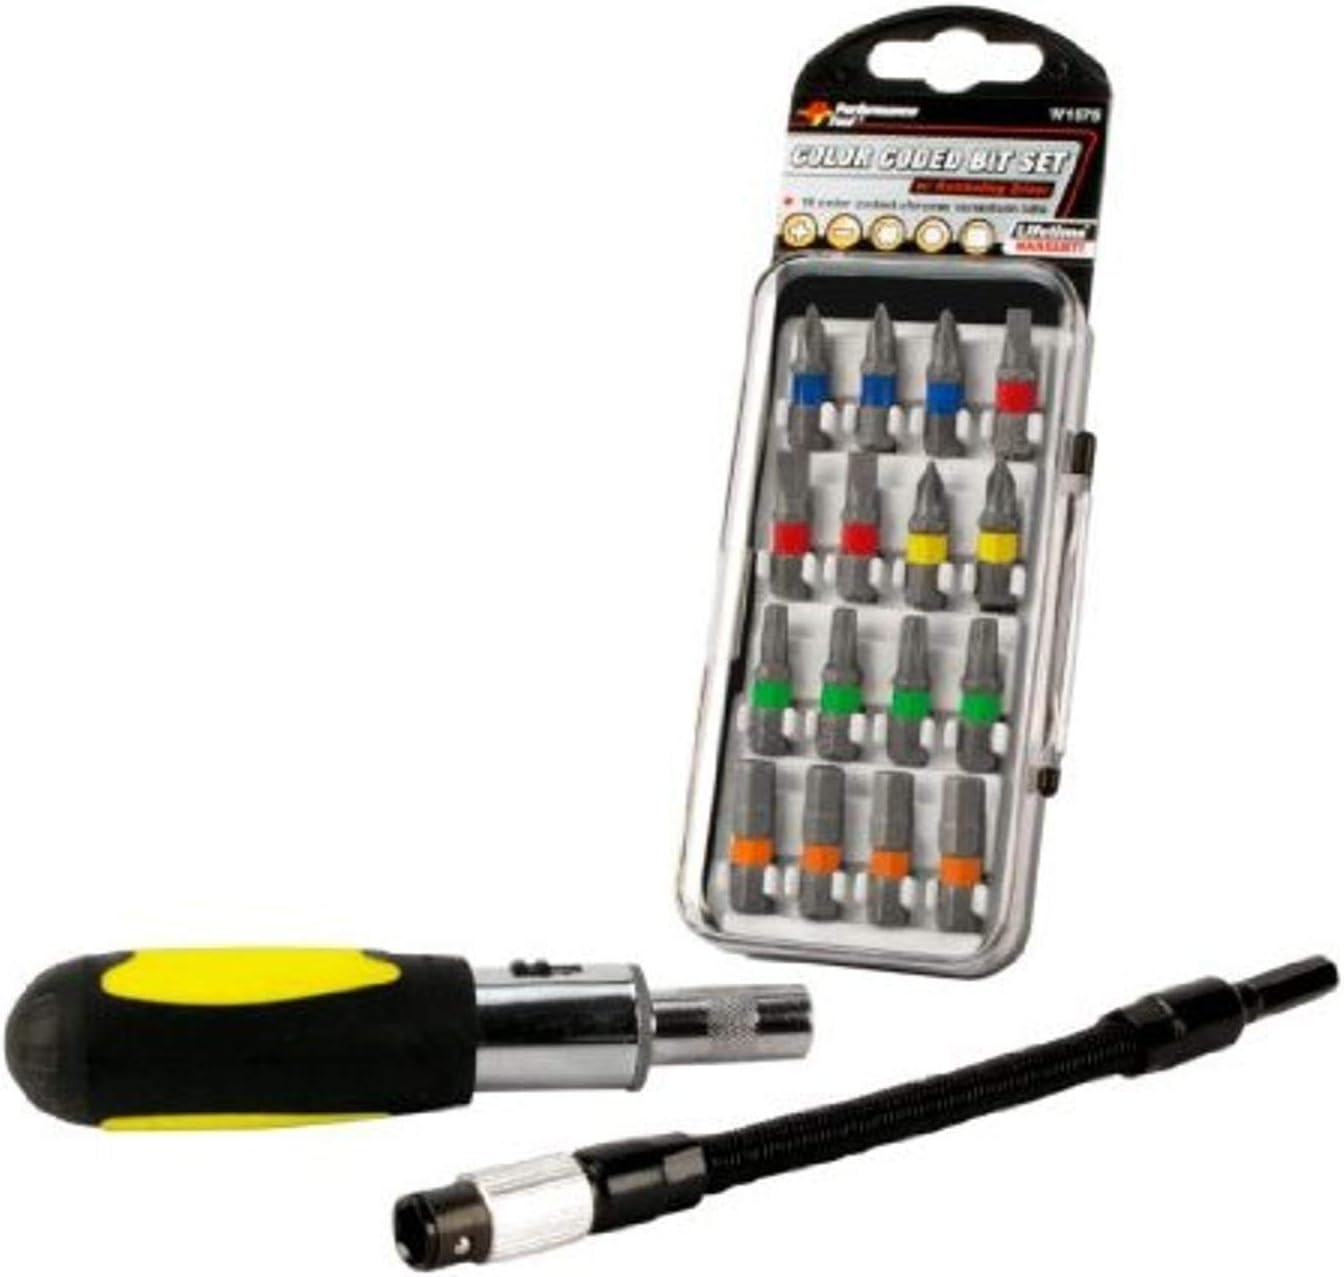 Performance Tool W1575 Color Coded Bit Set